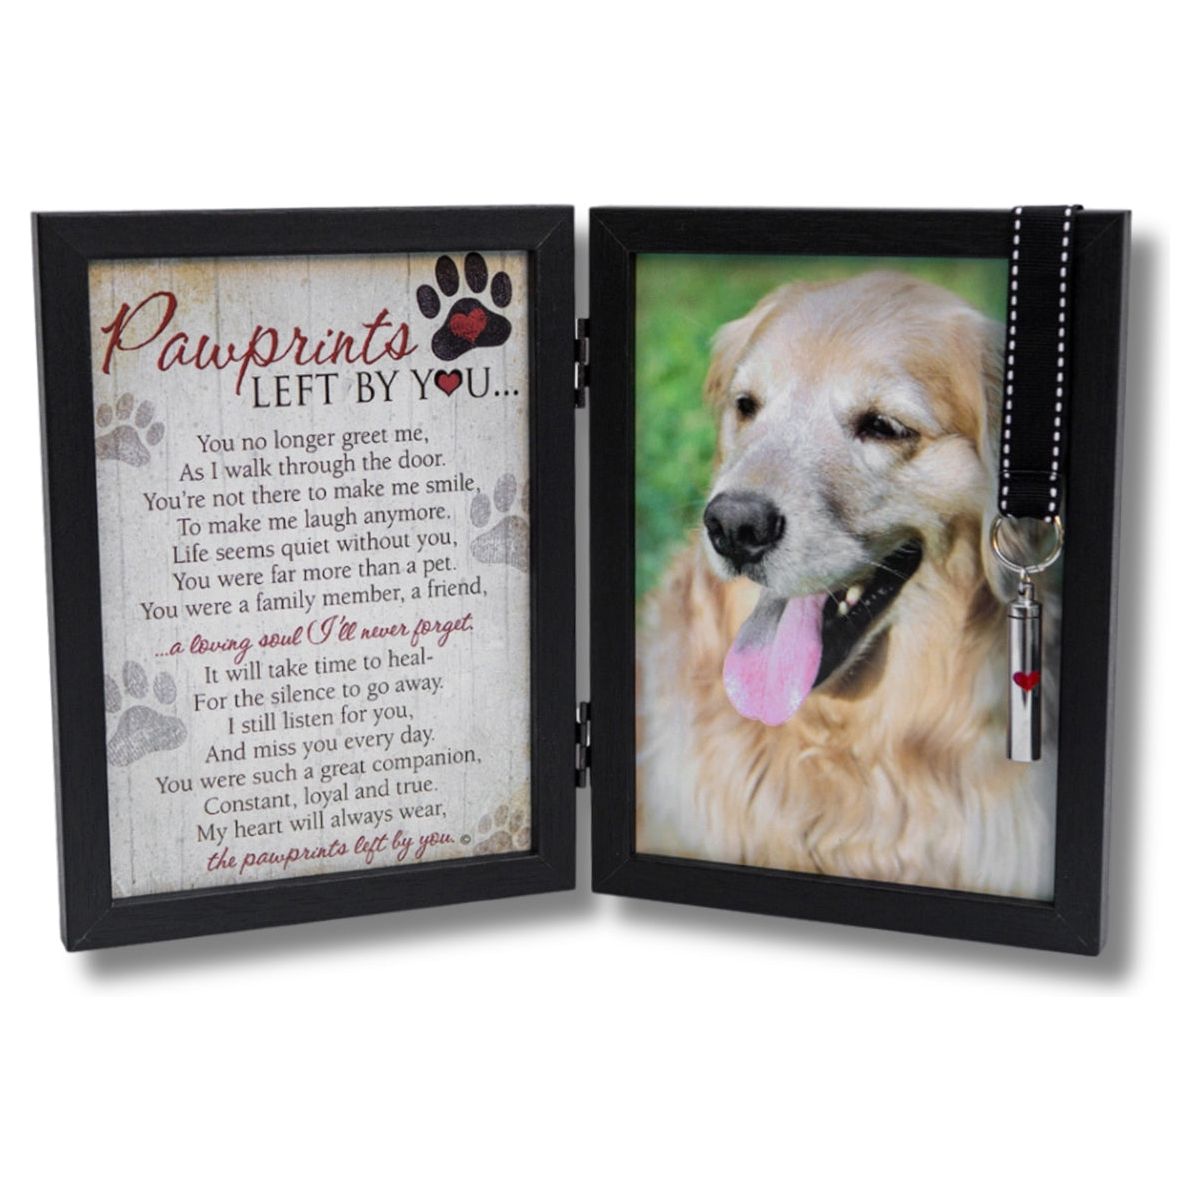 Pawprints Pet Loss Memorial Frame: Pawprints Left by You with Vial